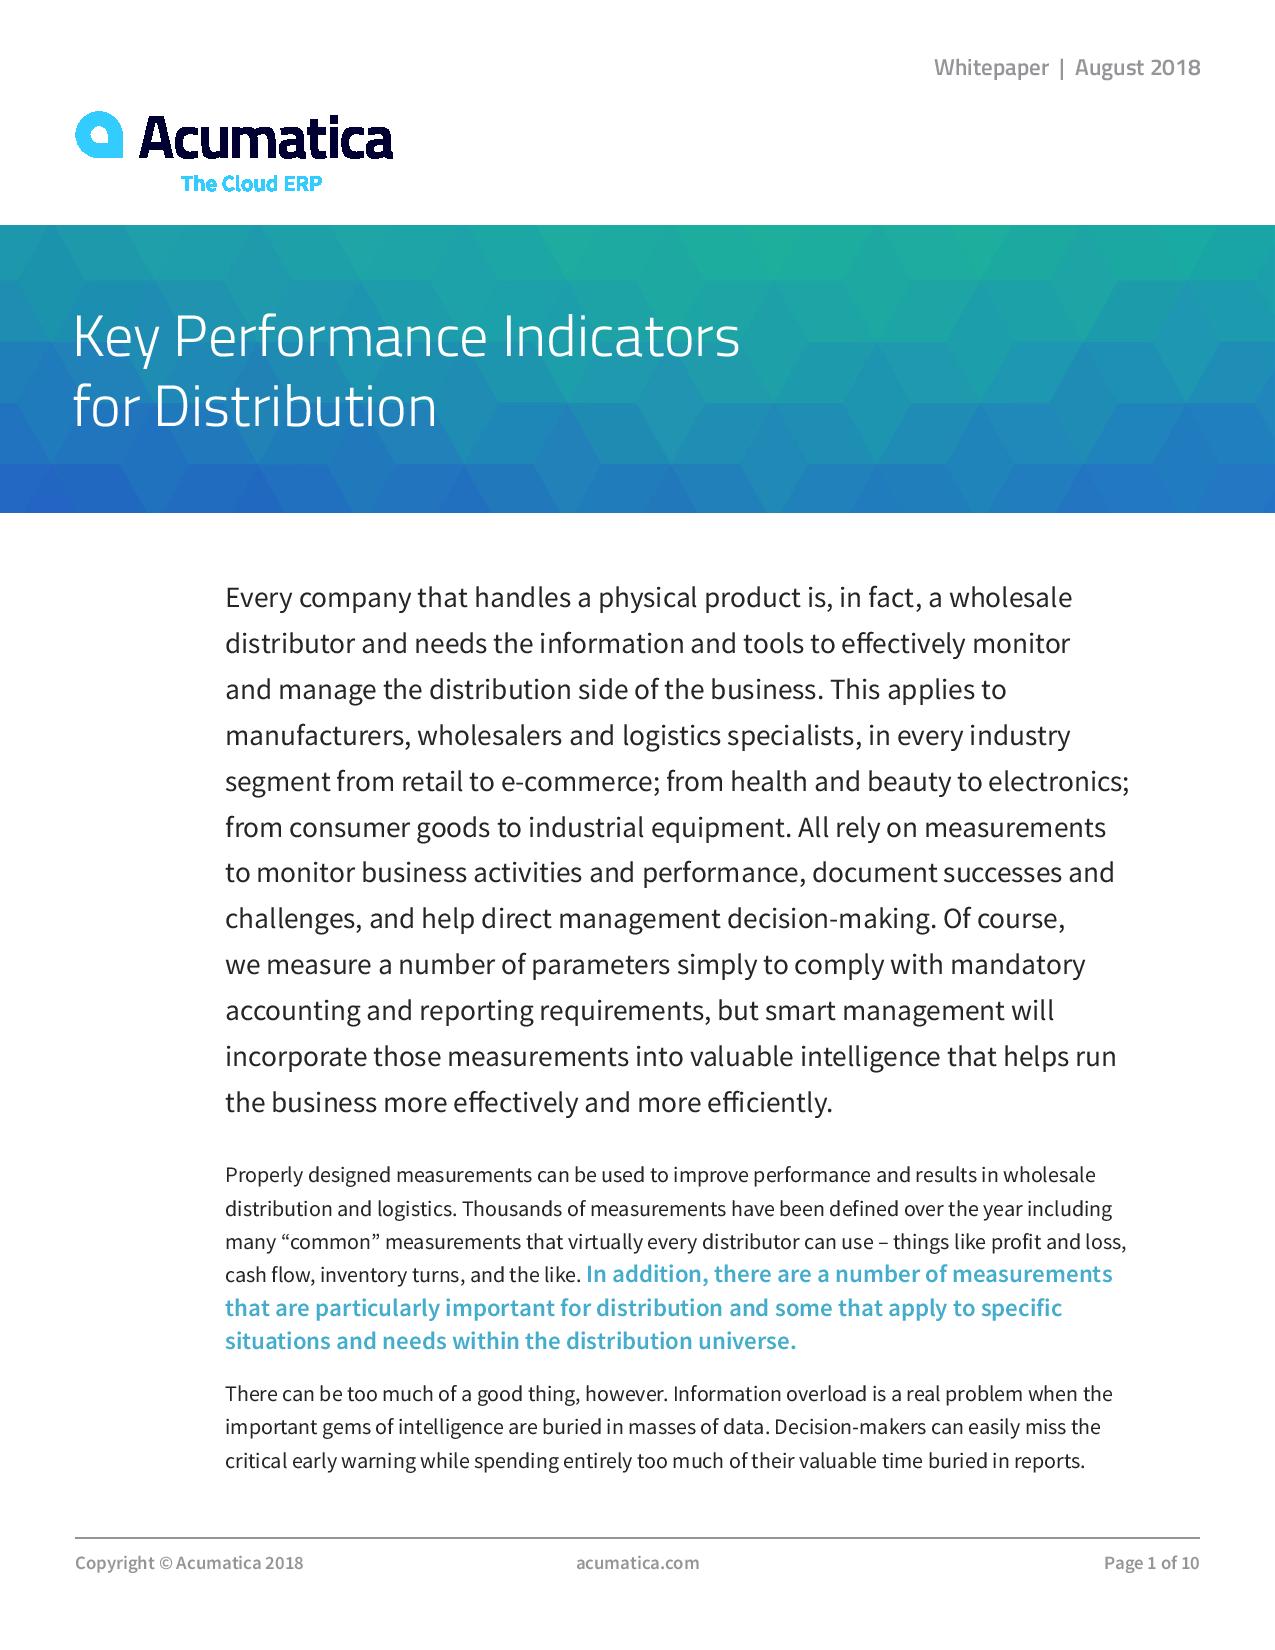 Improve Your Business Performance with Distribution KPIs, page 0